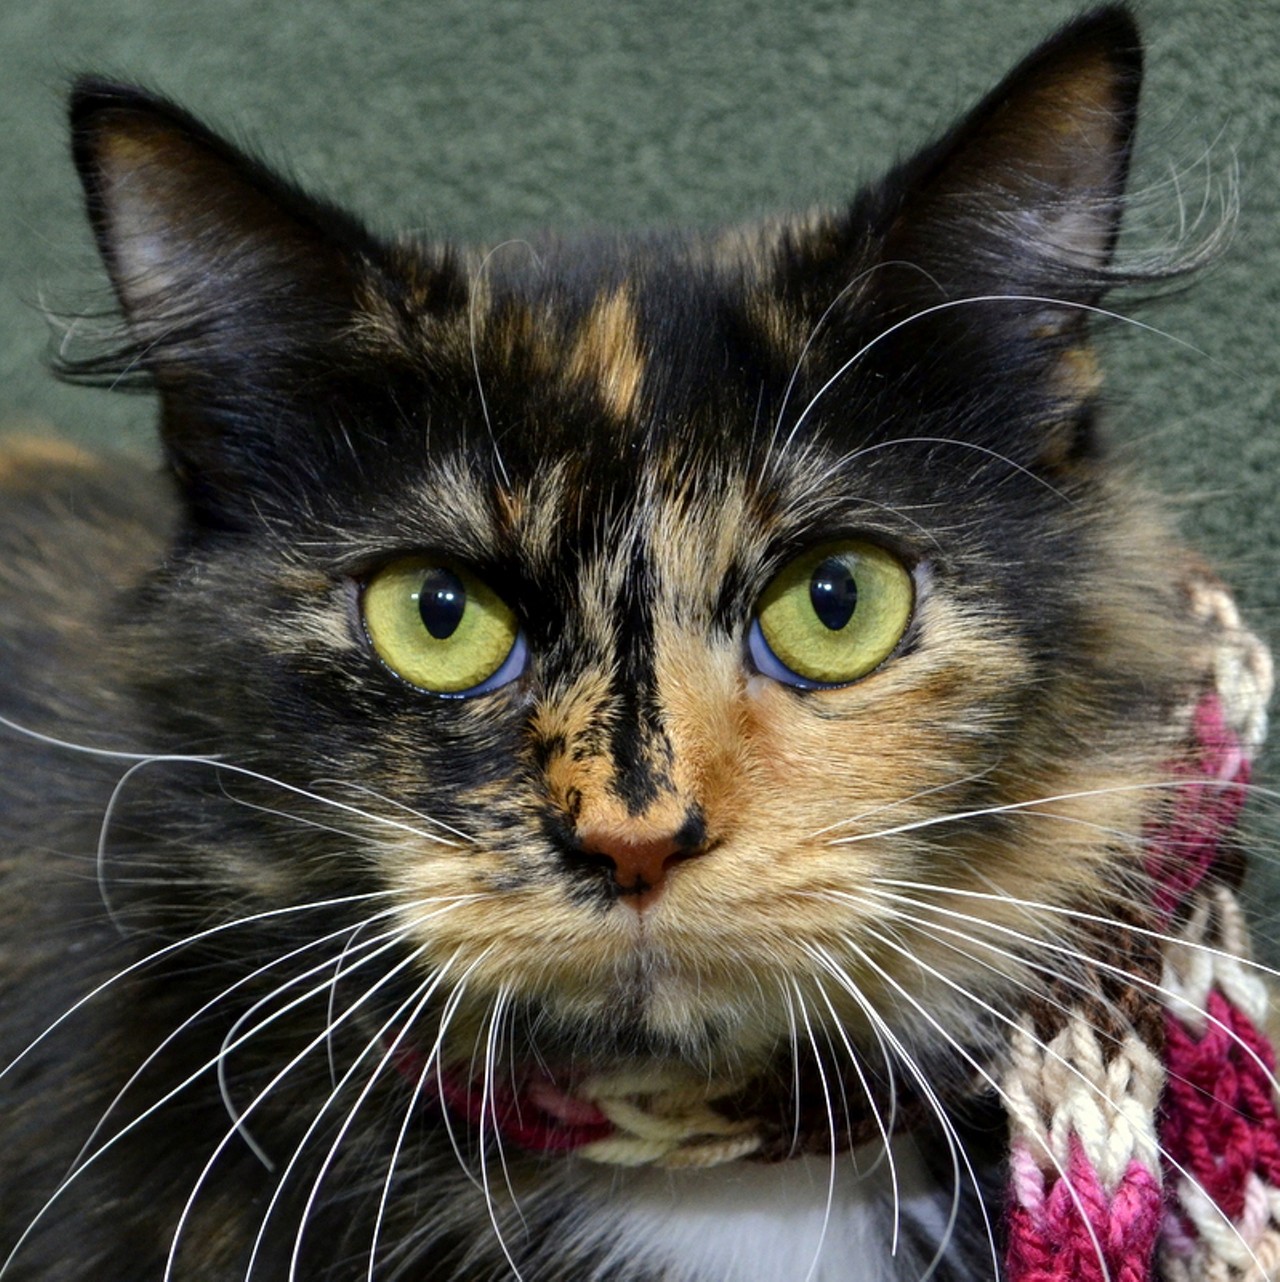 NAME: Astraea
GENDER: Female
BREED: Domestic Medium Hair
AGE: 2 years, 1 month
WEIGHT: 7 pounds
SPECIAL CONSIDERATIONS: None
REASON I CAME TO MHS: Homeless in Dearborn Heights
LOCATION: Premier Pet Supply of Novi
ID NUMBER: 864617